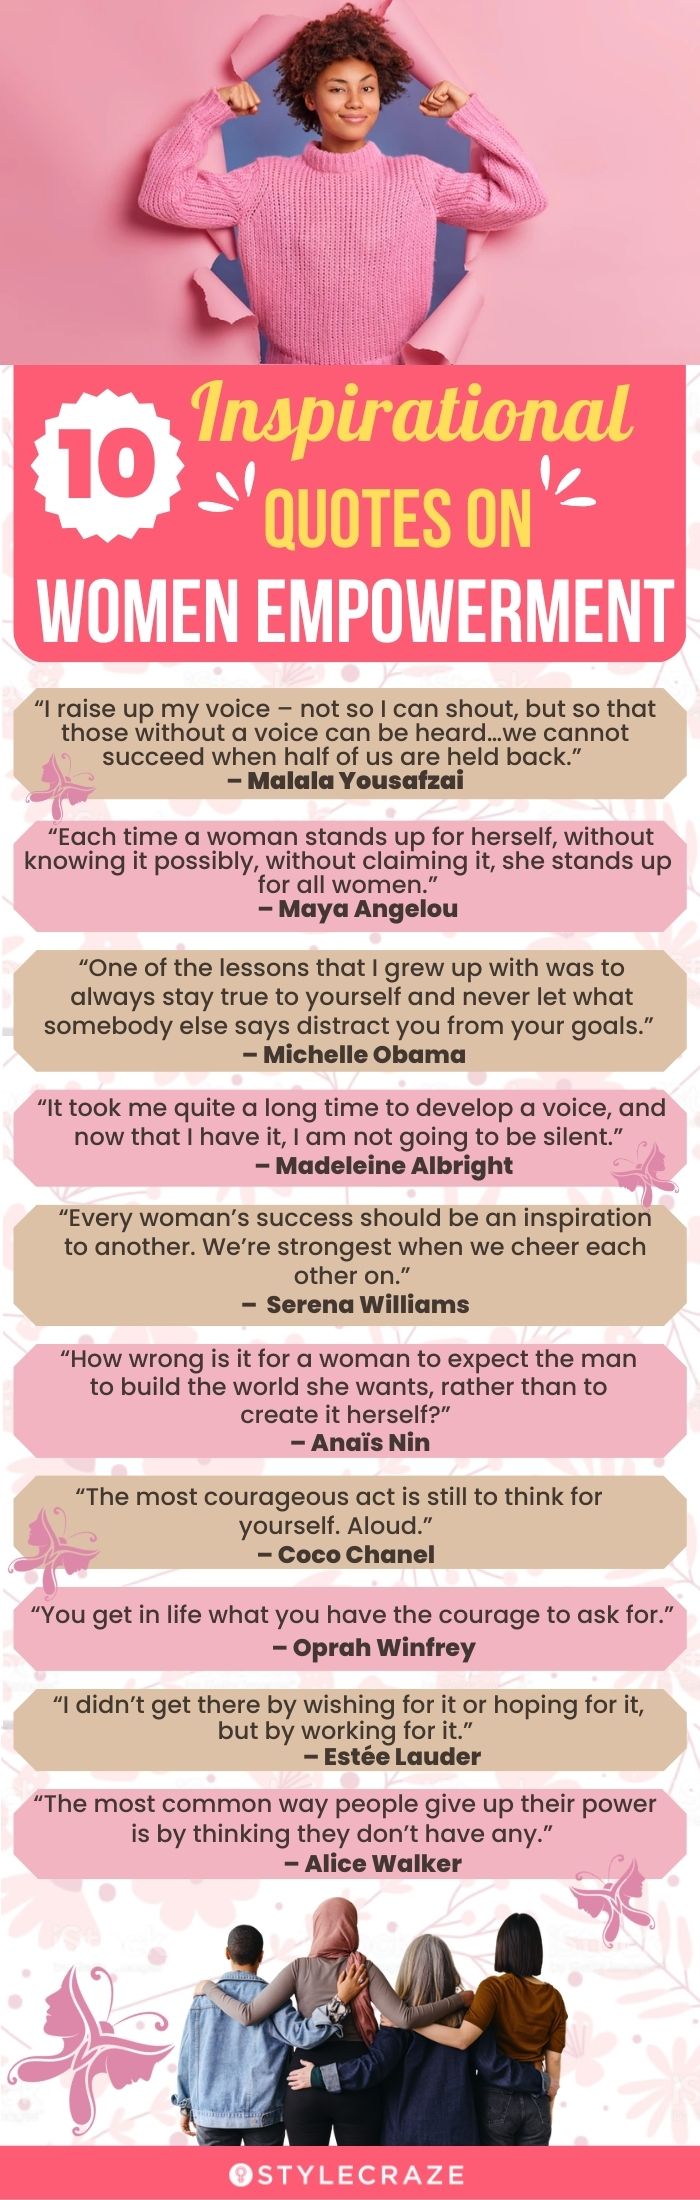 10 inspirational quotes on women empowerment (infographic)